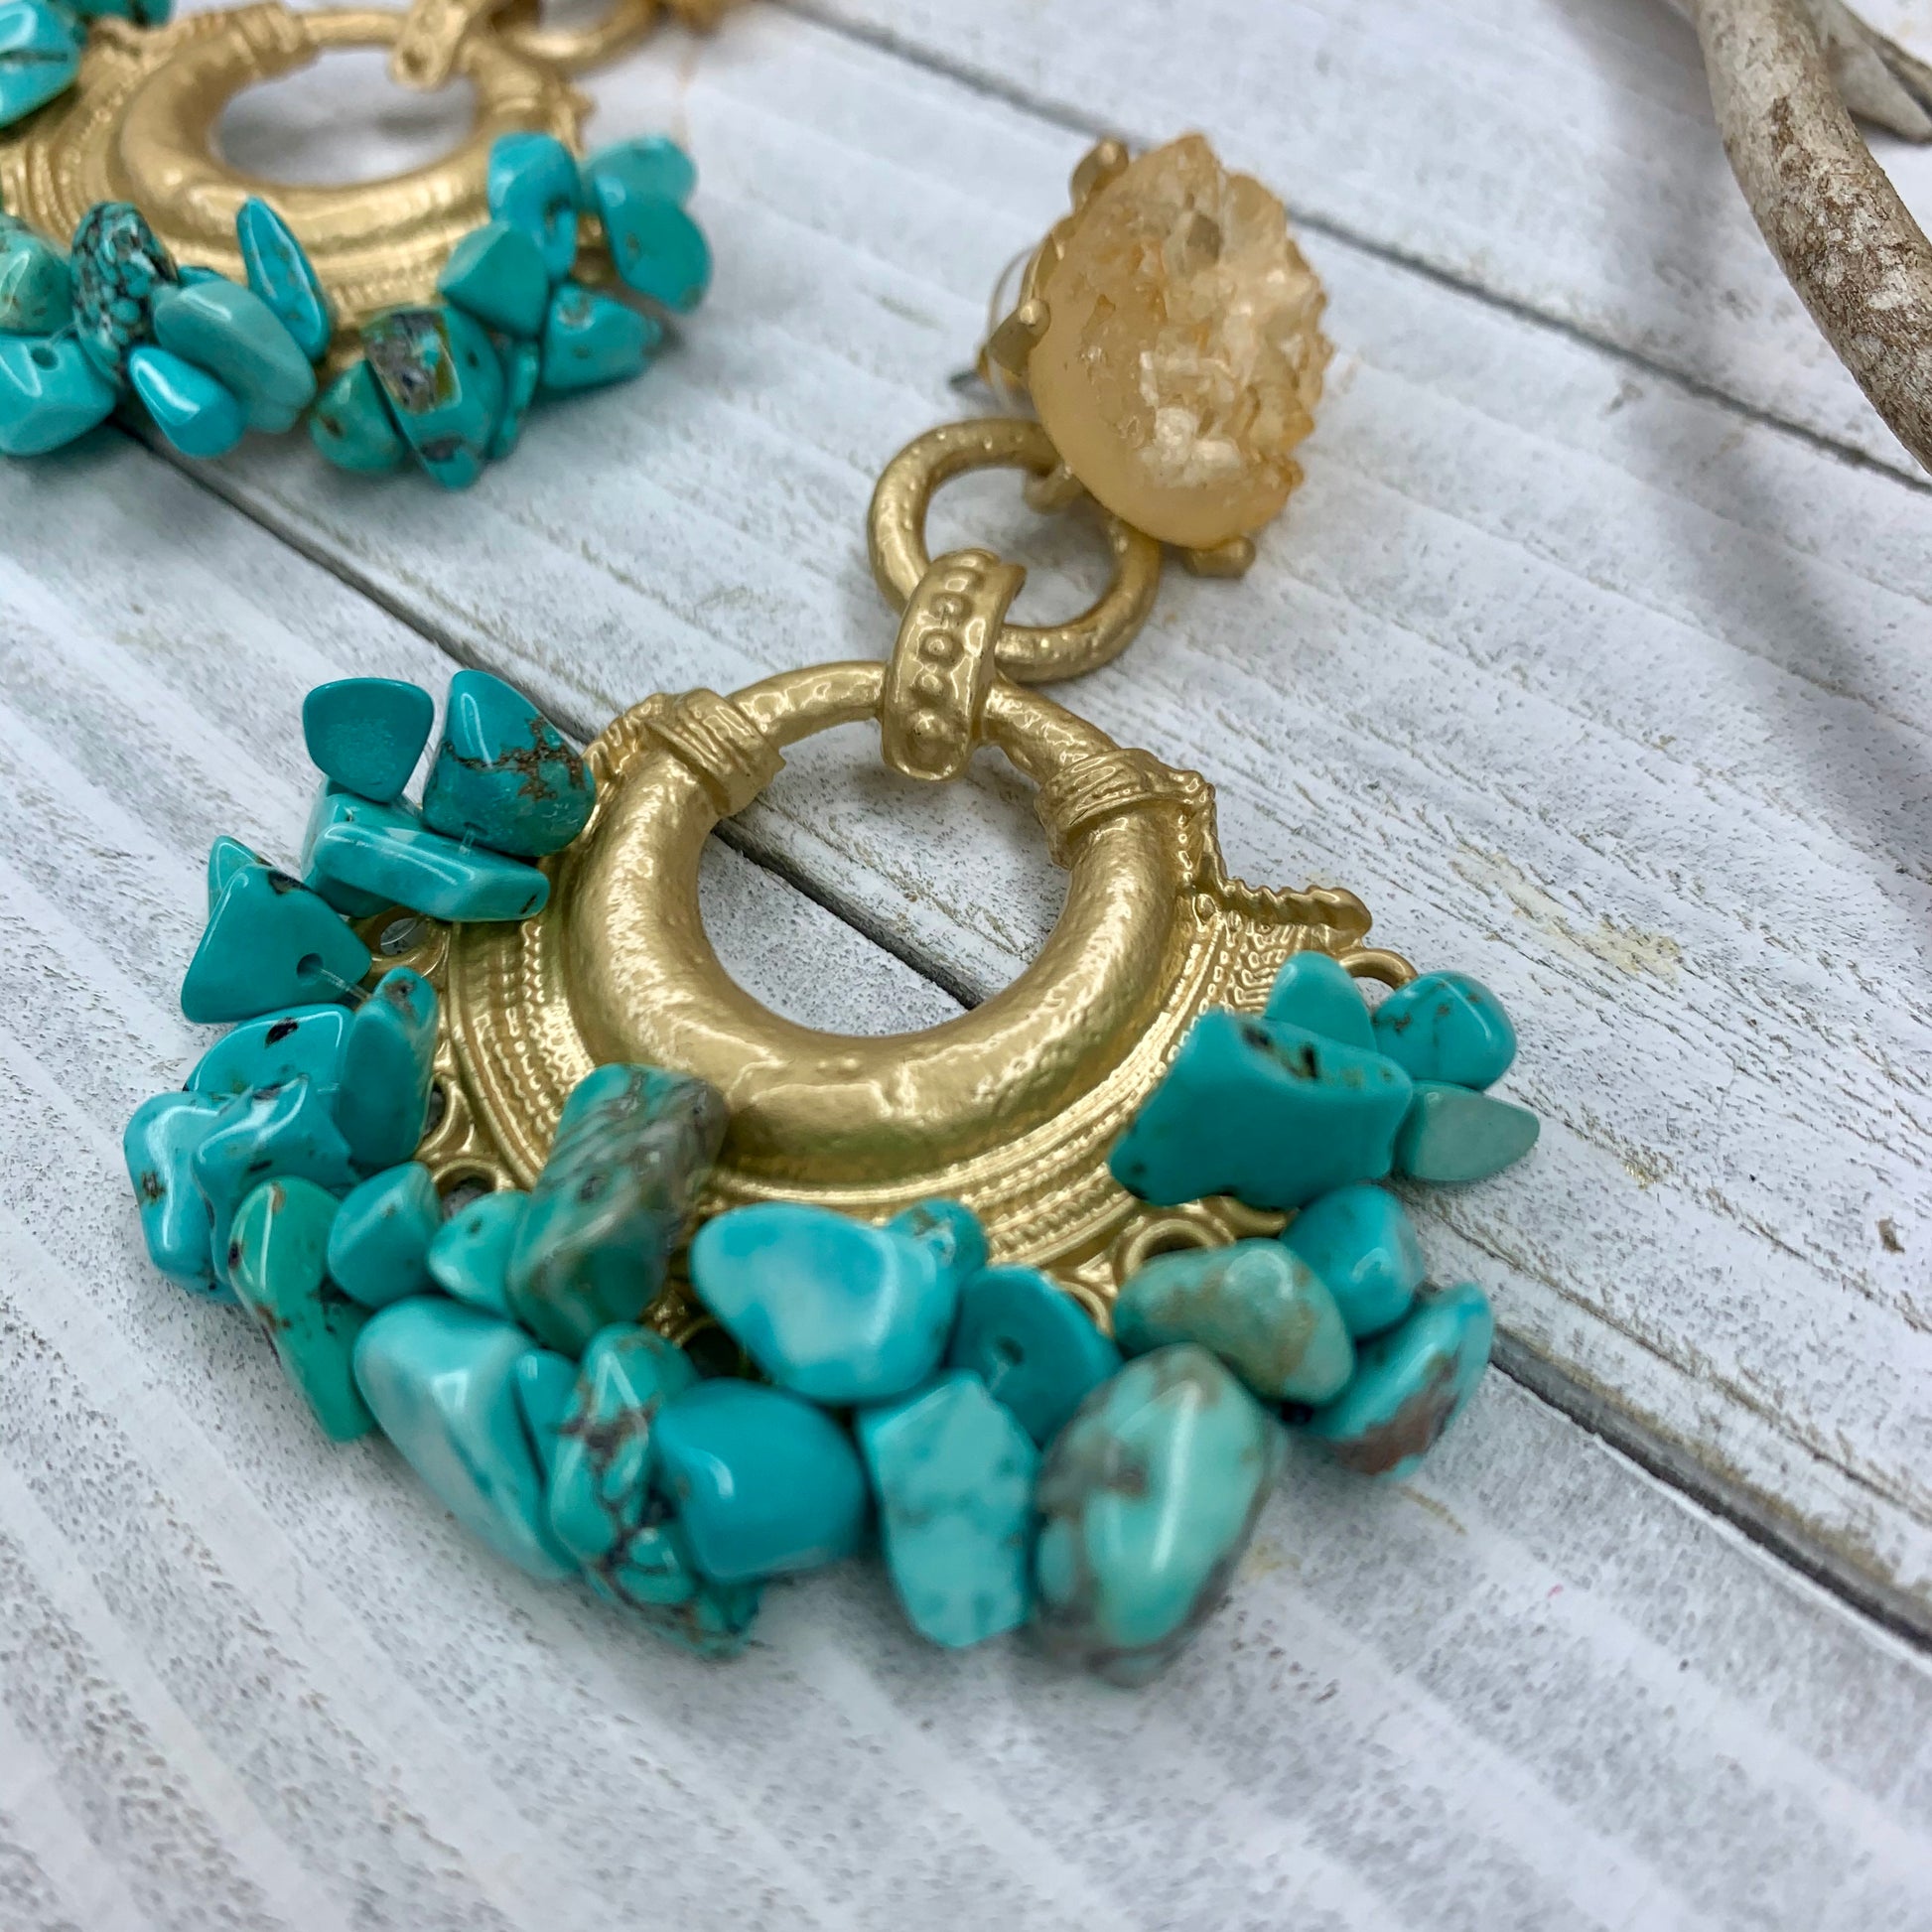 Cute Based Metad Plated Earrings with Turquoise Gemstones Chips